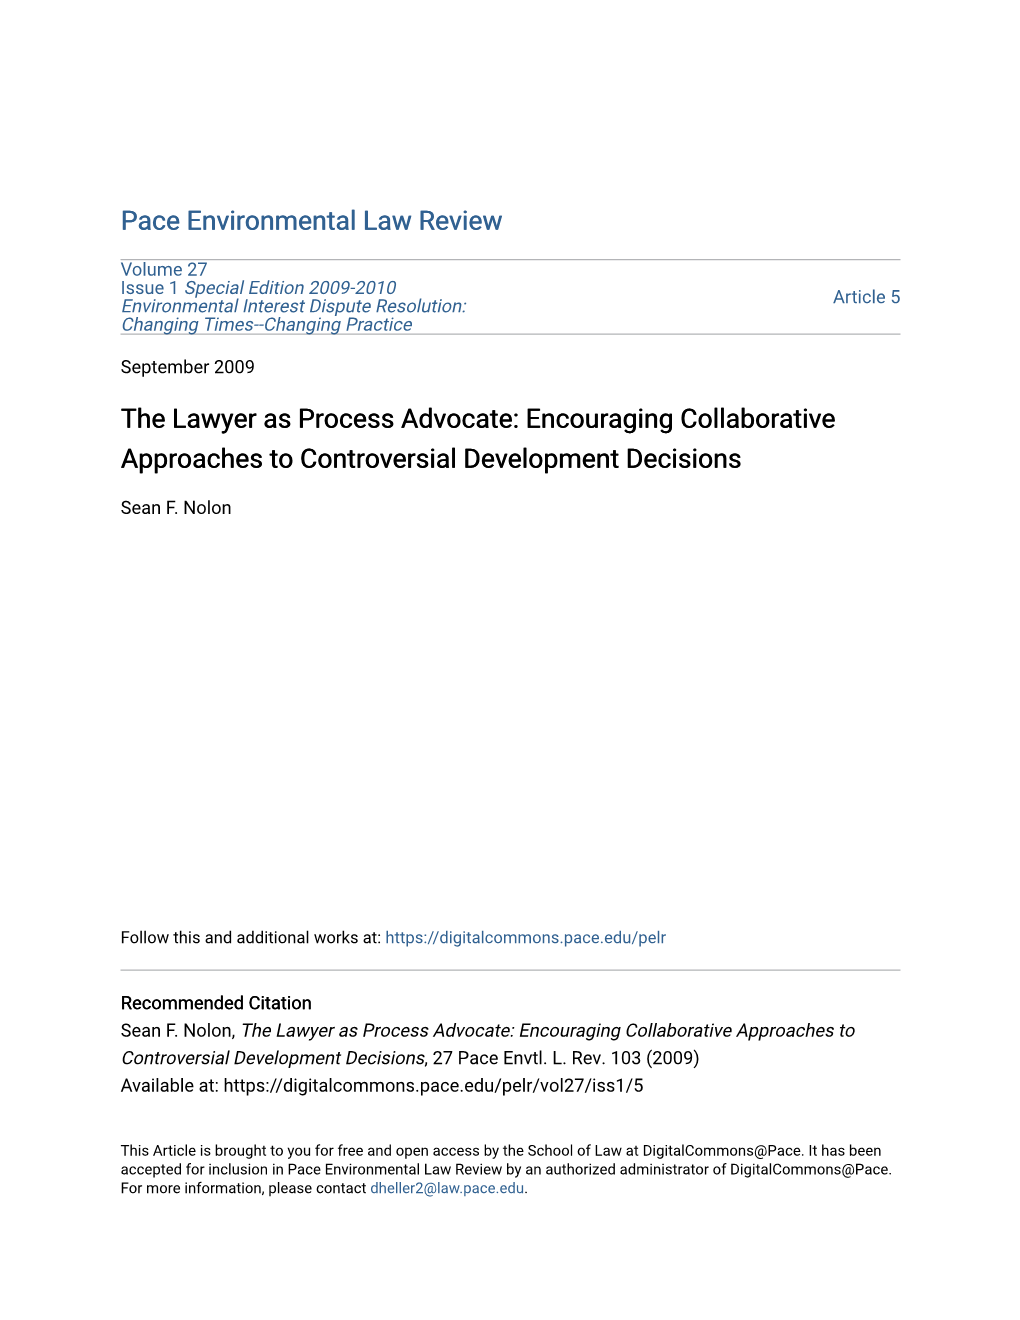 The Lawyer As Process Advocate: Encouraging Collaborative Approaches to Controversial Development Decisions